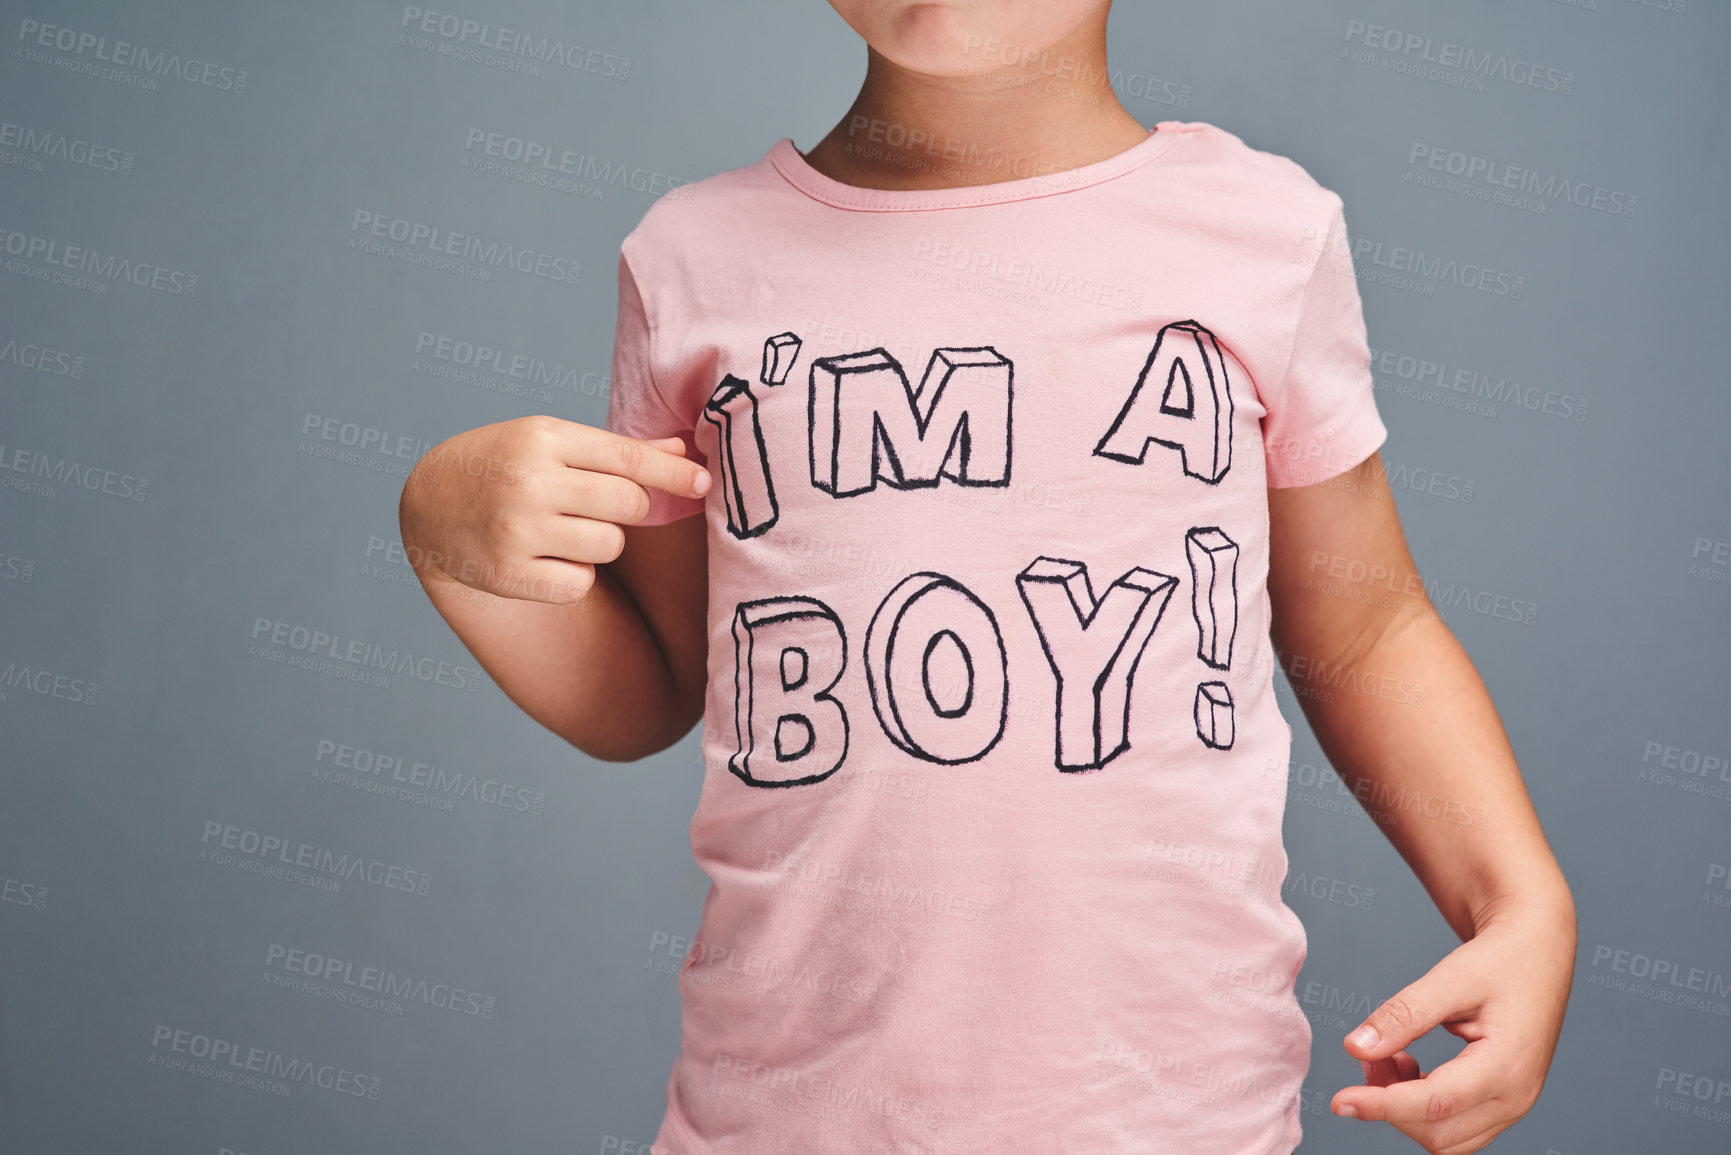 Buy stock photo Studio shot of an unrecognizable boy wearing a t shirt with “I’m a boy” printed on it against a grey background